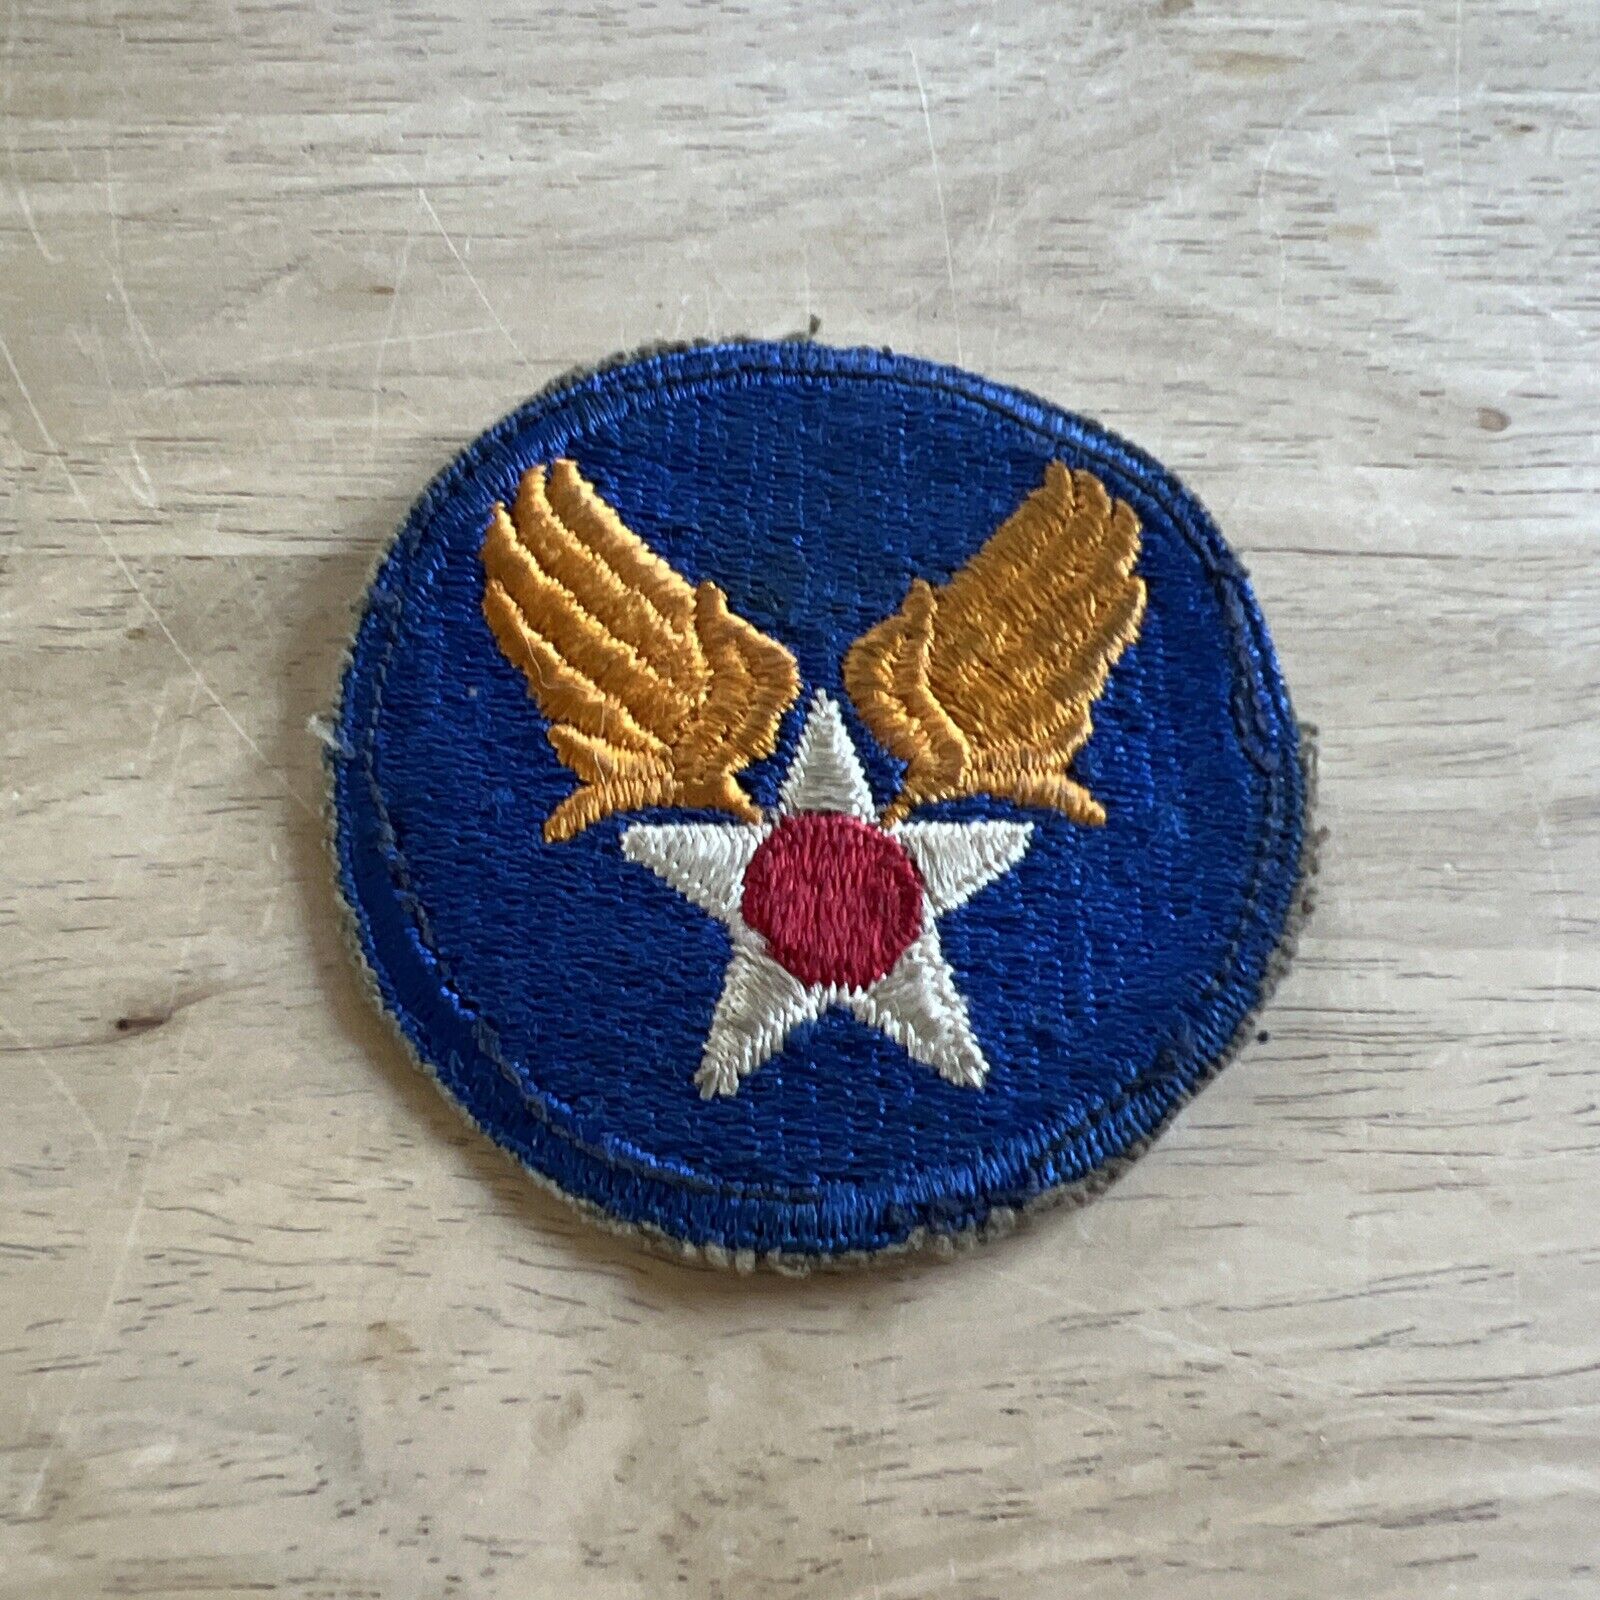 VTG WWII AIR FORCE GOLD WINGS WHITE STAR RED CIRCLE US MILITARY INSIGNIA PATCH